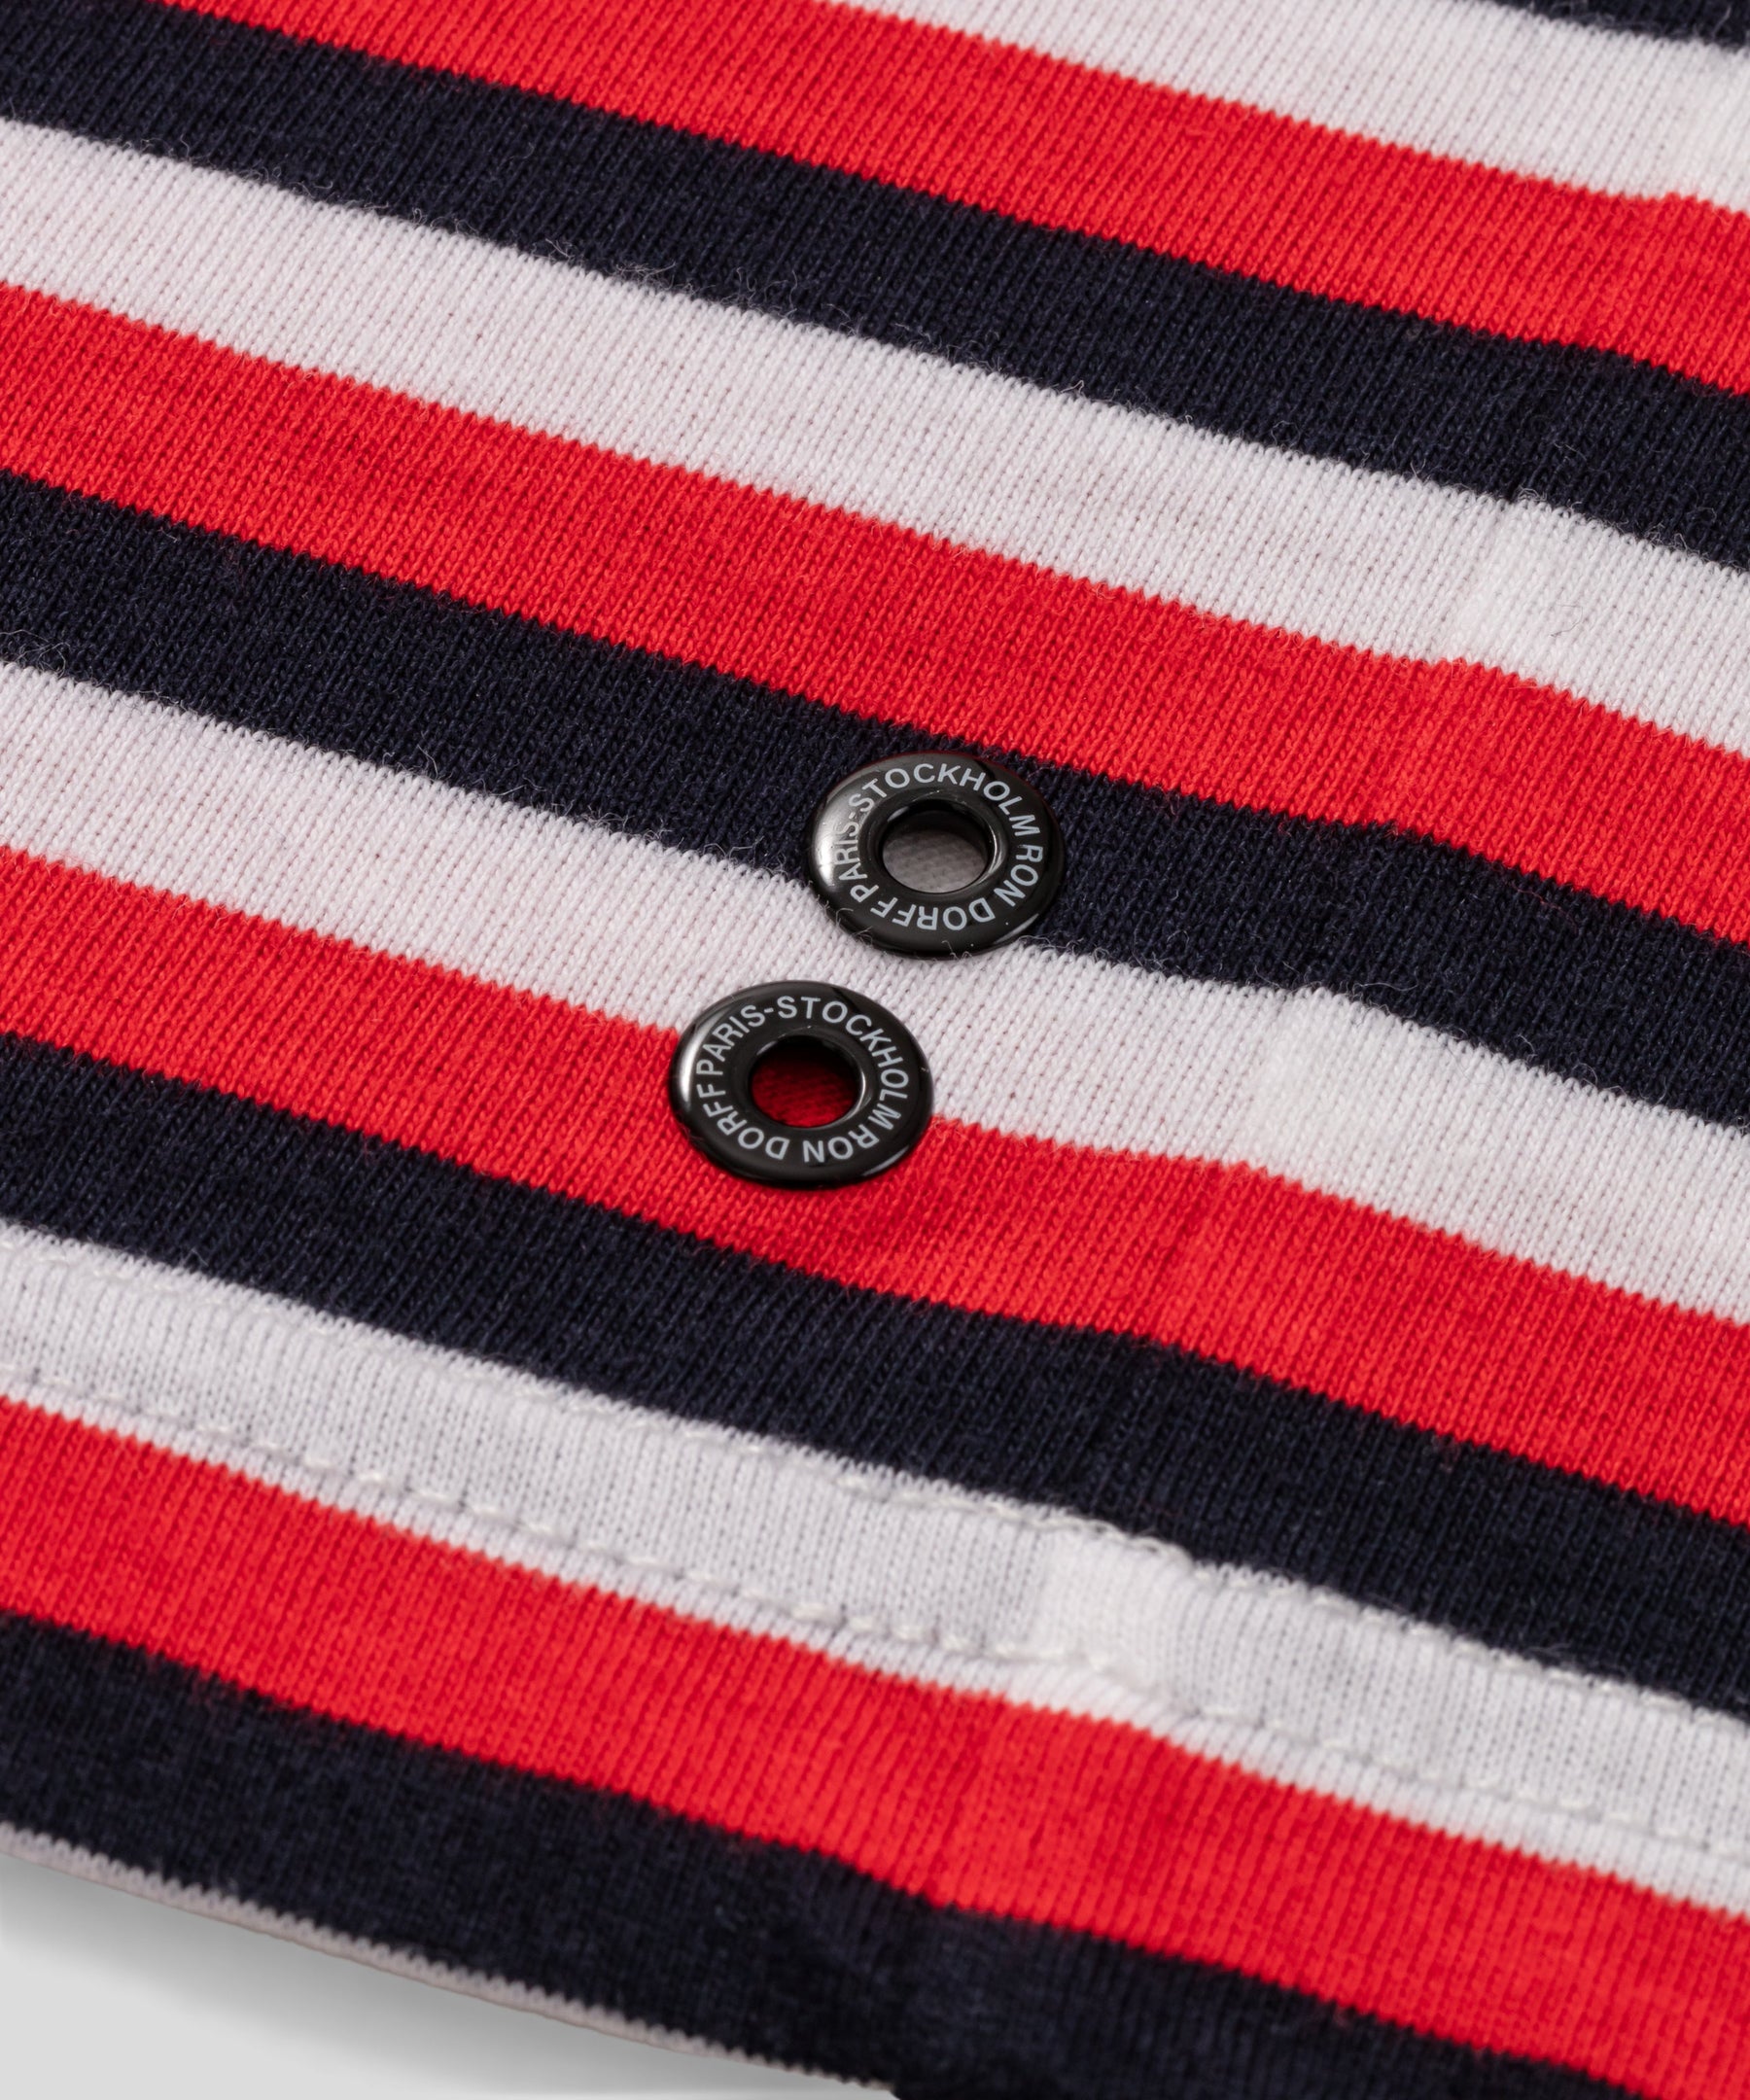 T-Shirt Eyelet Edition w. Tricolor Stripes: Summer Red/Navy/White